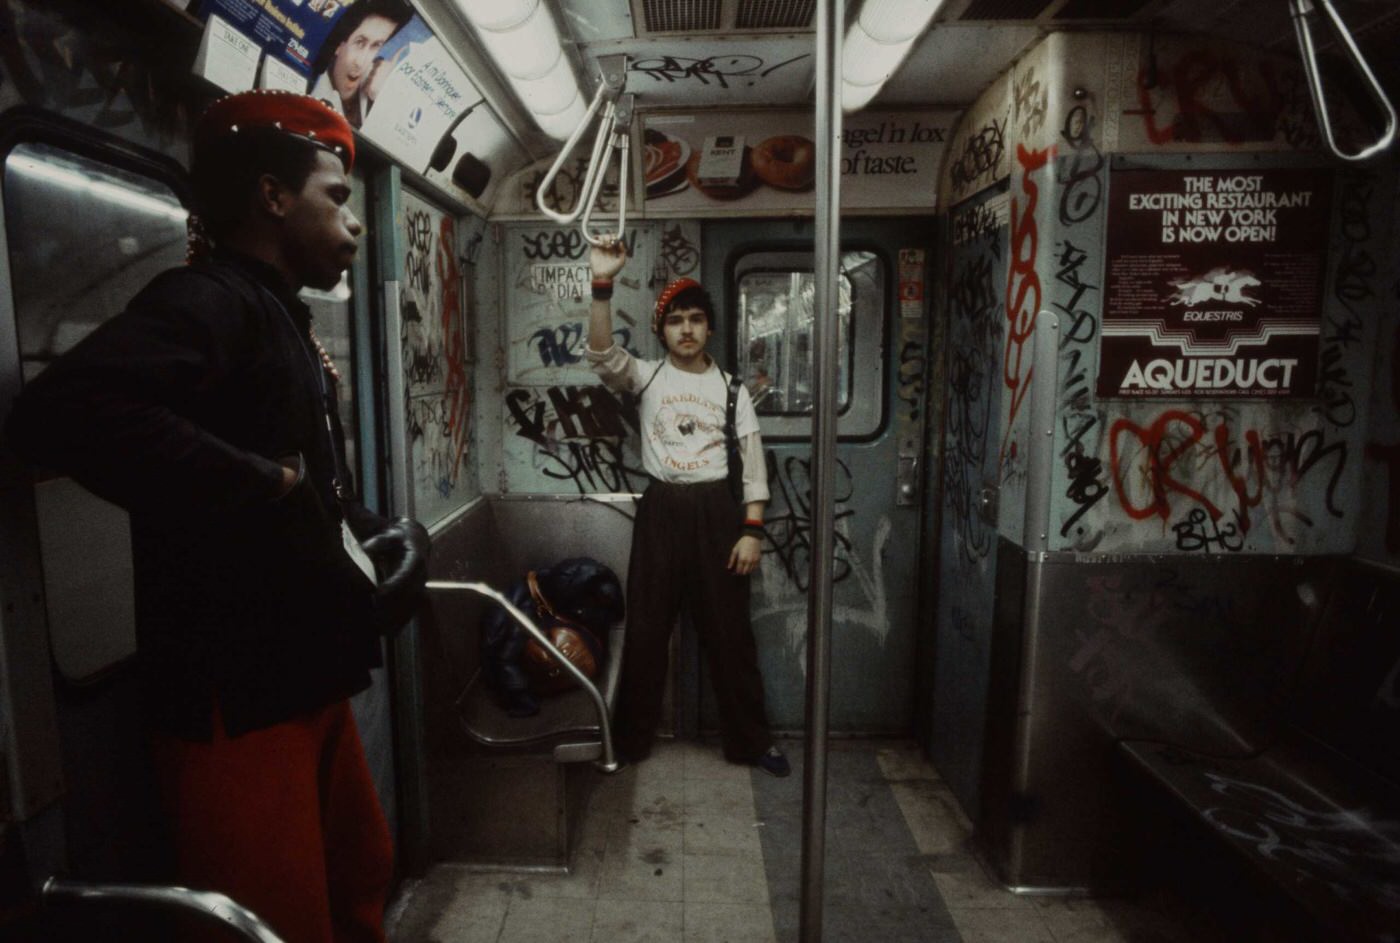 20 Nostalgic Photos Depicting a Gritty Journey Through New York City's Subway in 1981 by Christopher Morris